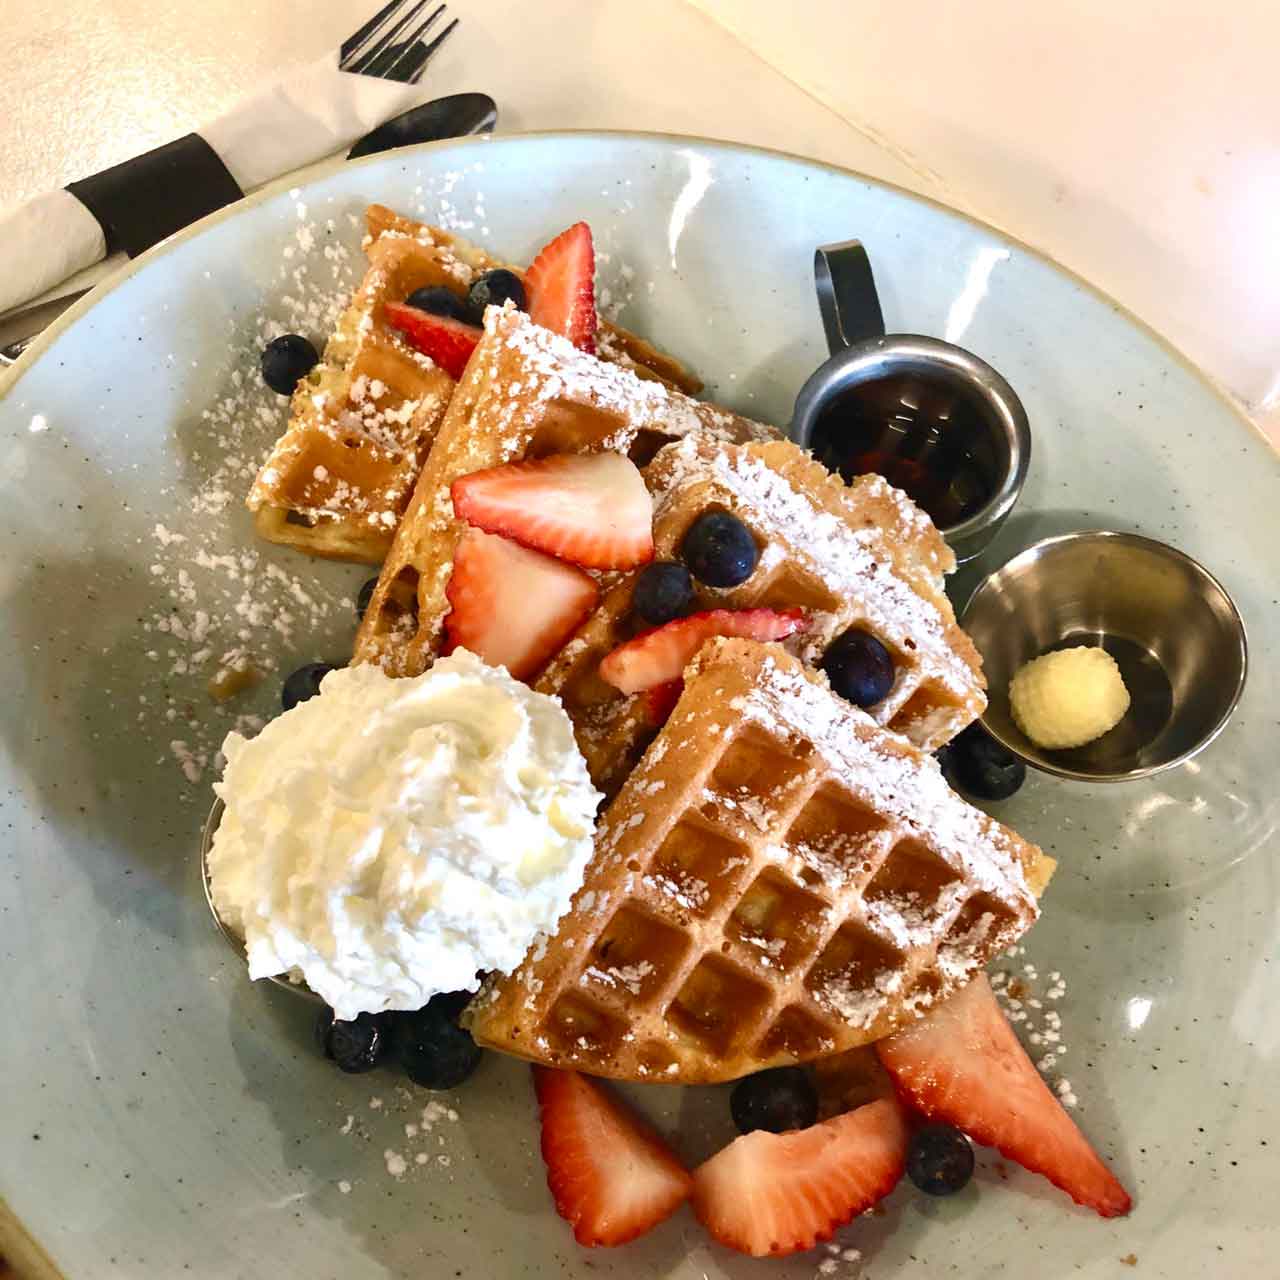 Belgian Waffles with strawberries and blueberries ($13)